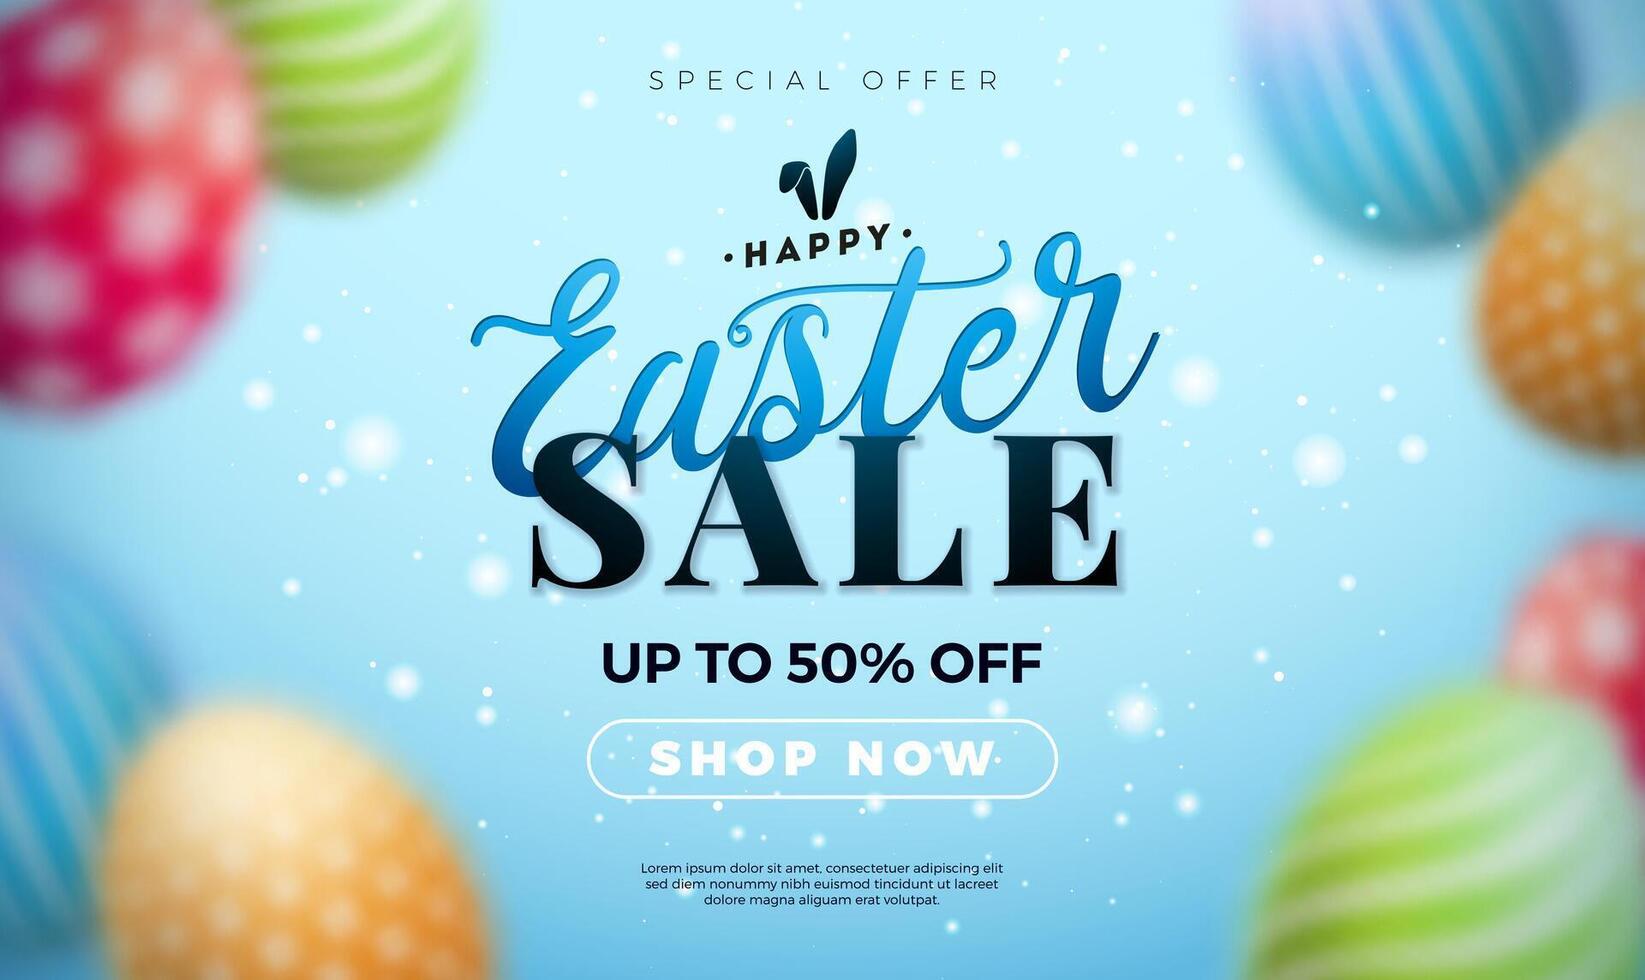 Easter Sale Illustration with Blurred Colorful Painted Egg and and Typography Lettering with Rabbit Ears on Blue Background. Vector Religion Holiday Celebration Banner Design Template for Coupon